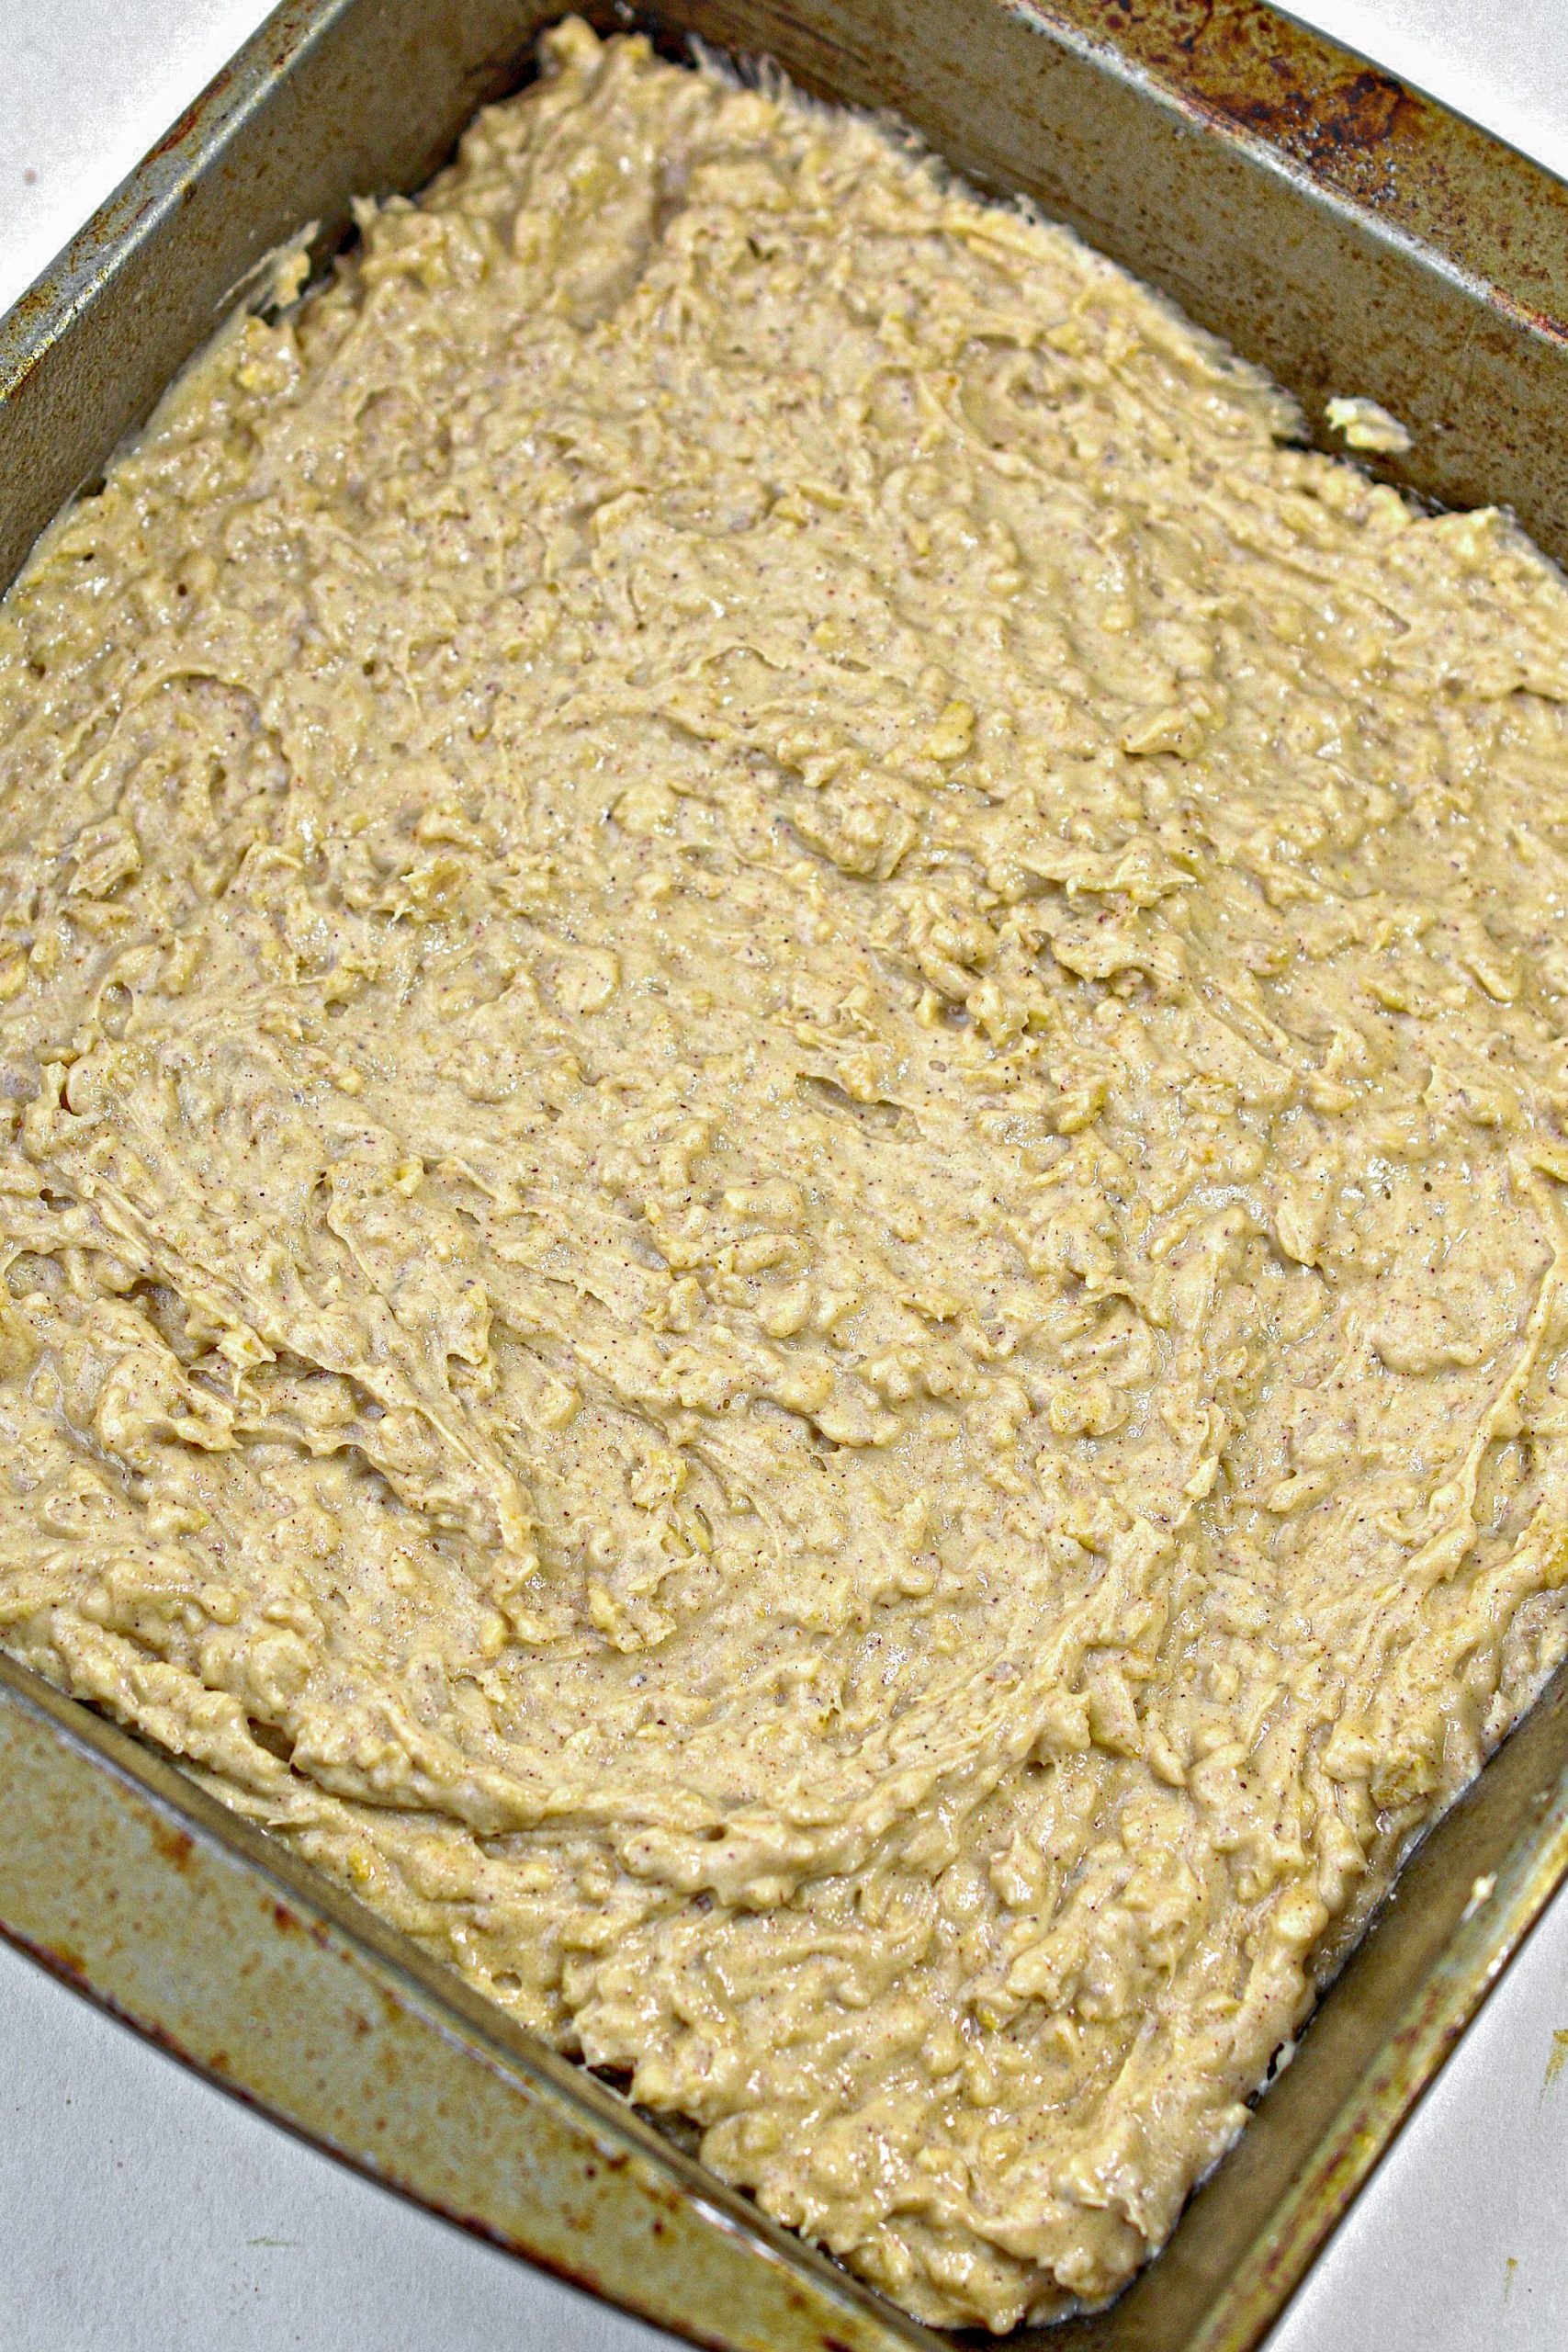 Press the batter mixture in an even layer in the bottom of a 9x9 well-greased baking dish.